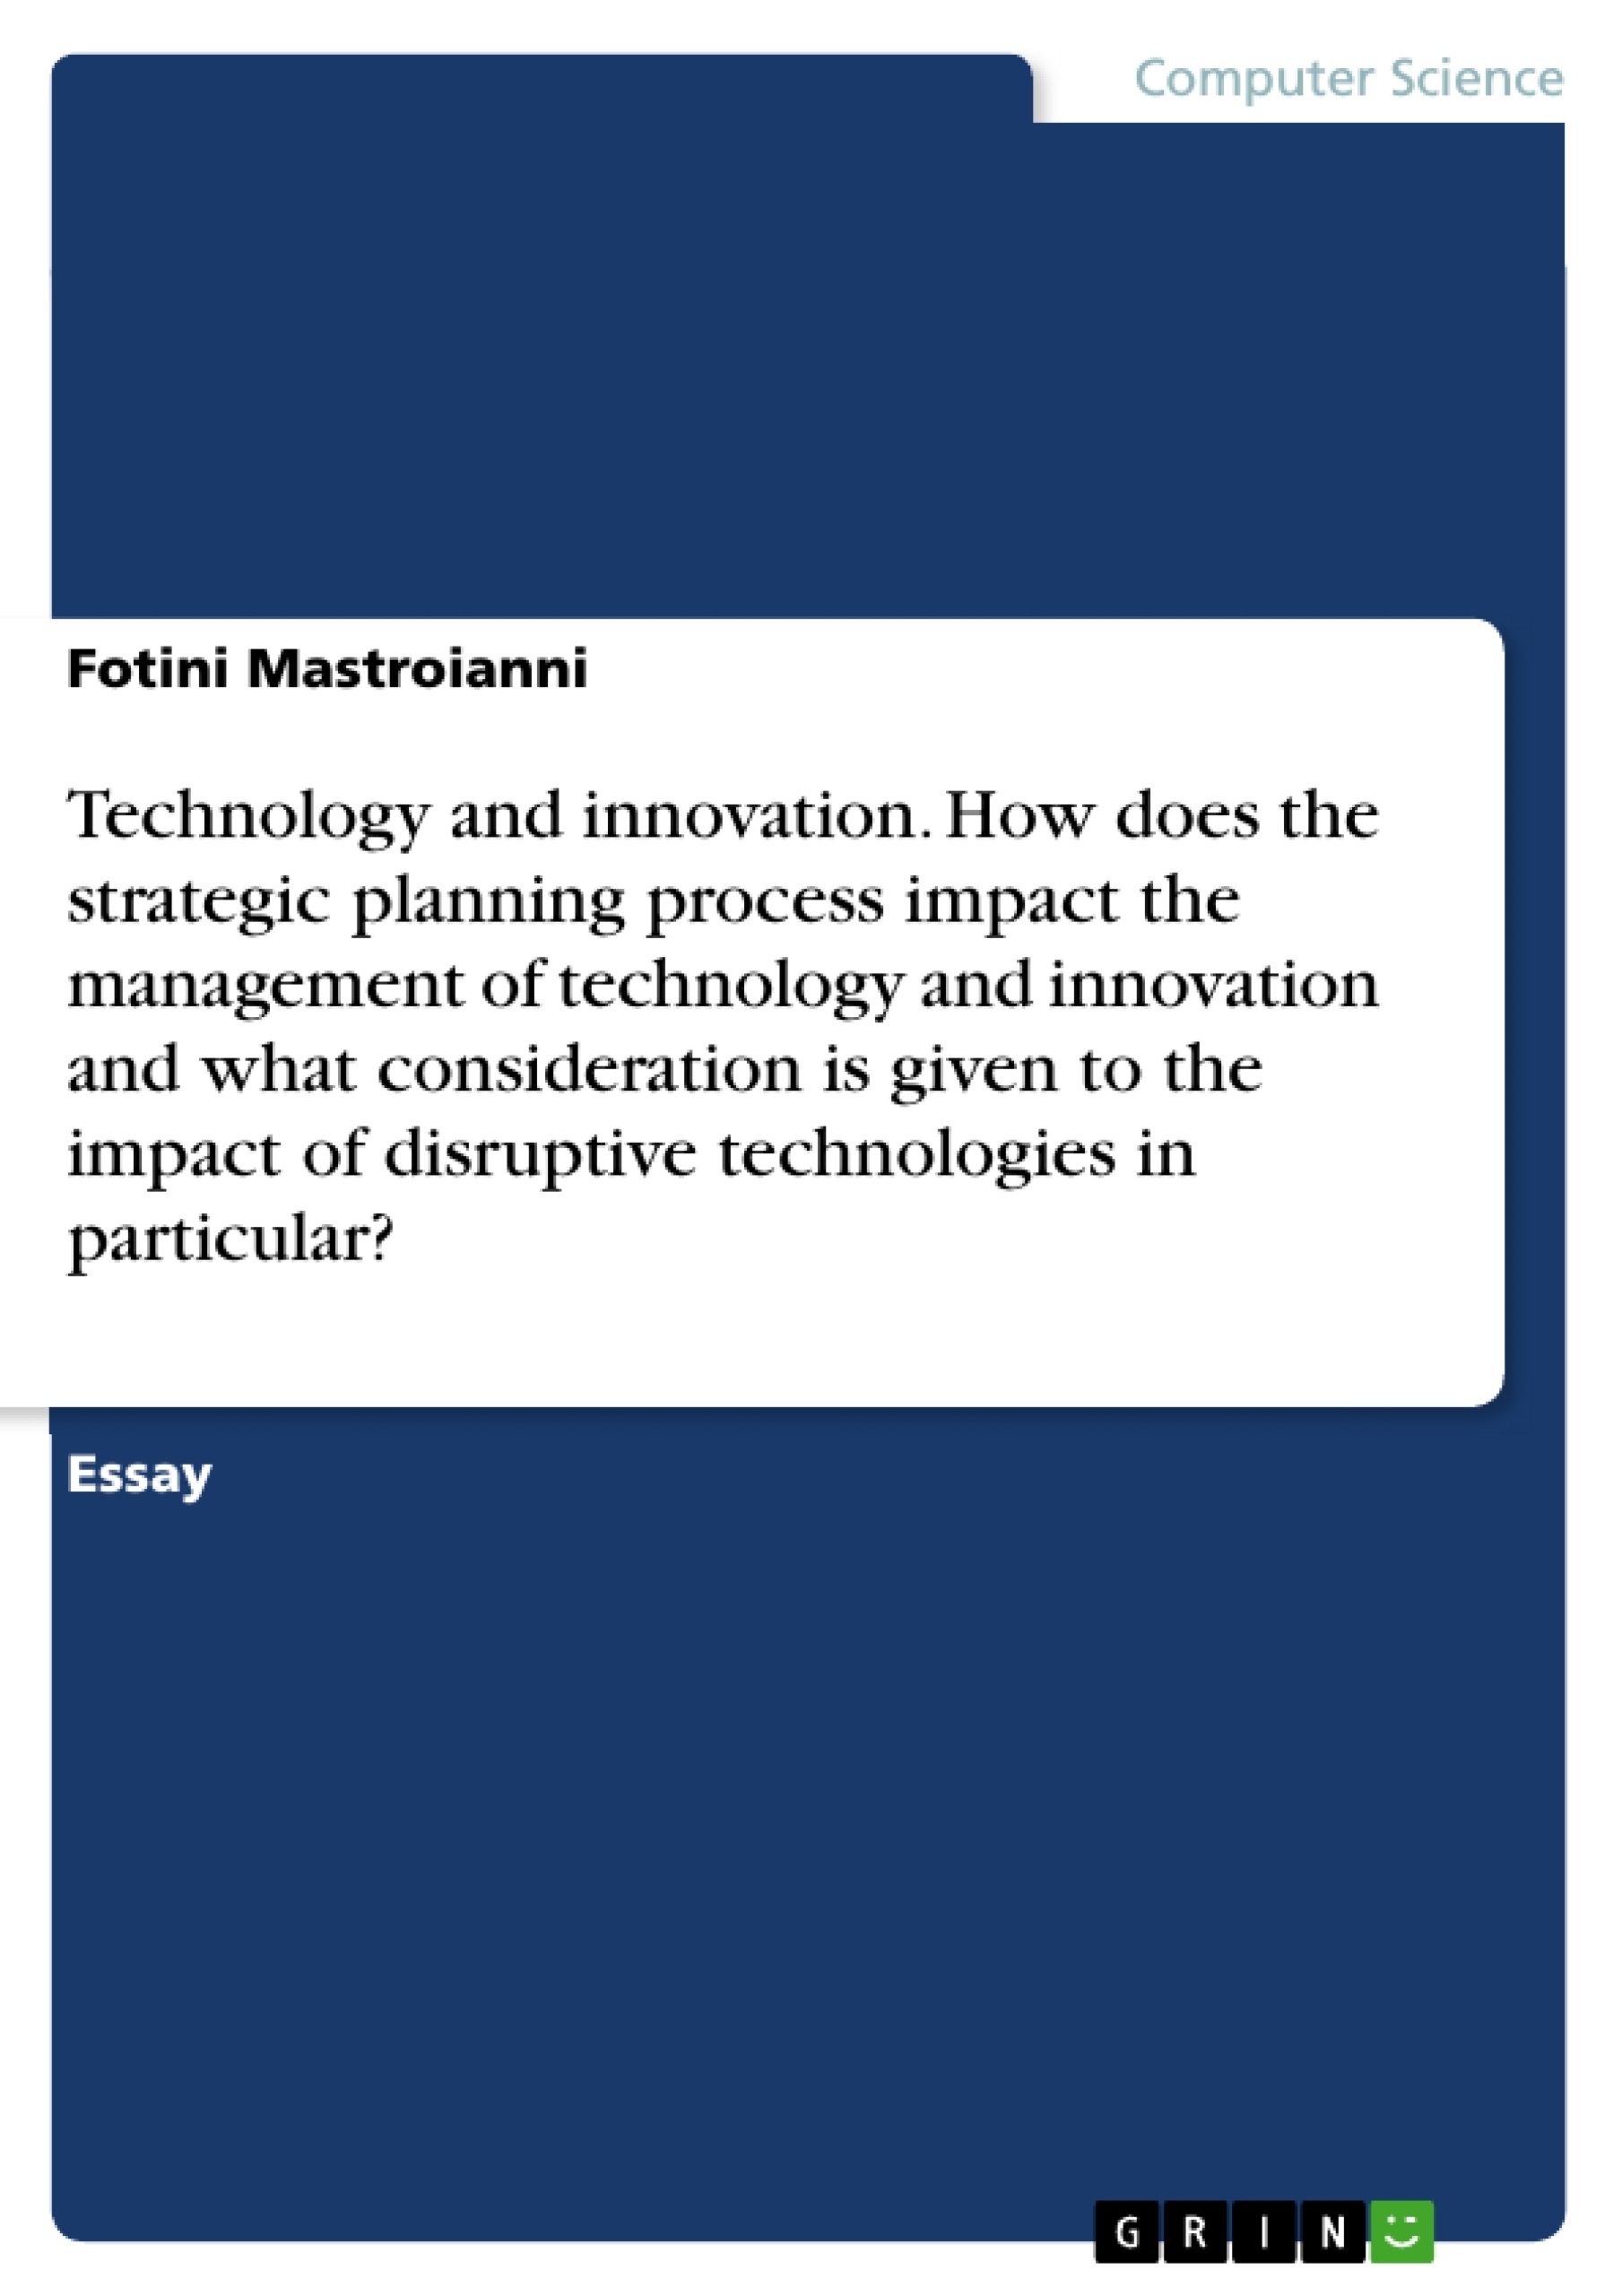 Title: Technology and innovation. How does the strategic planning process impact the management of technology and innovation and what consideration is given to the impact of disruptive technologies in particular?